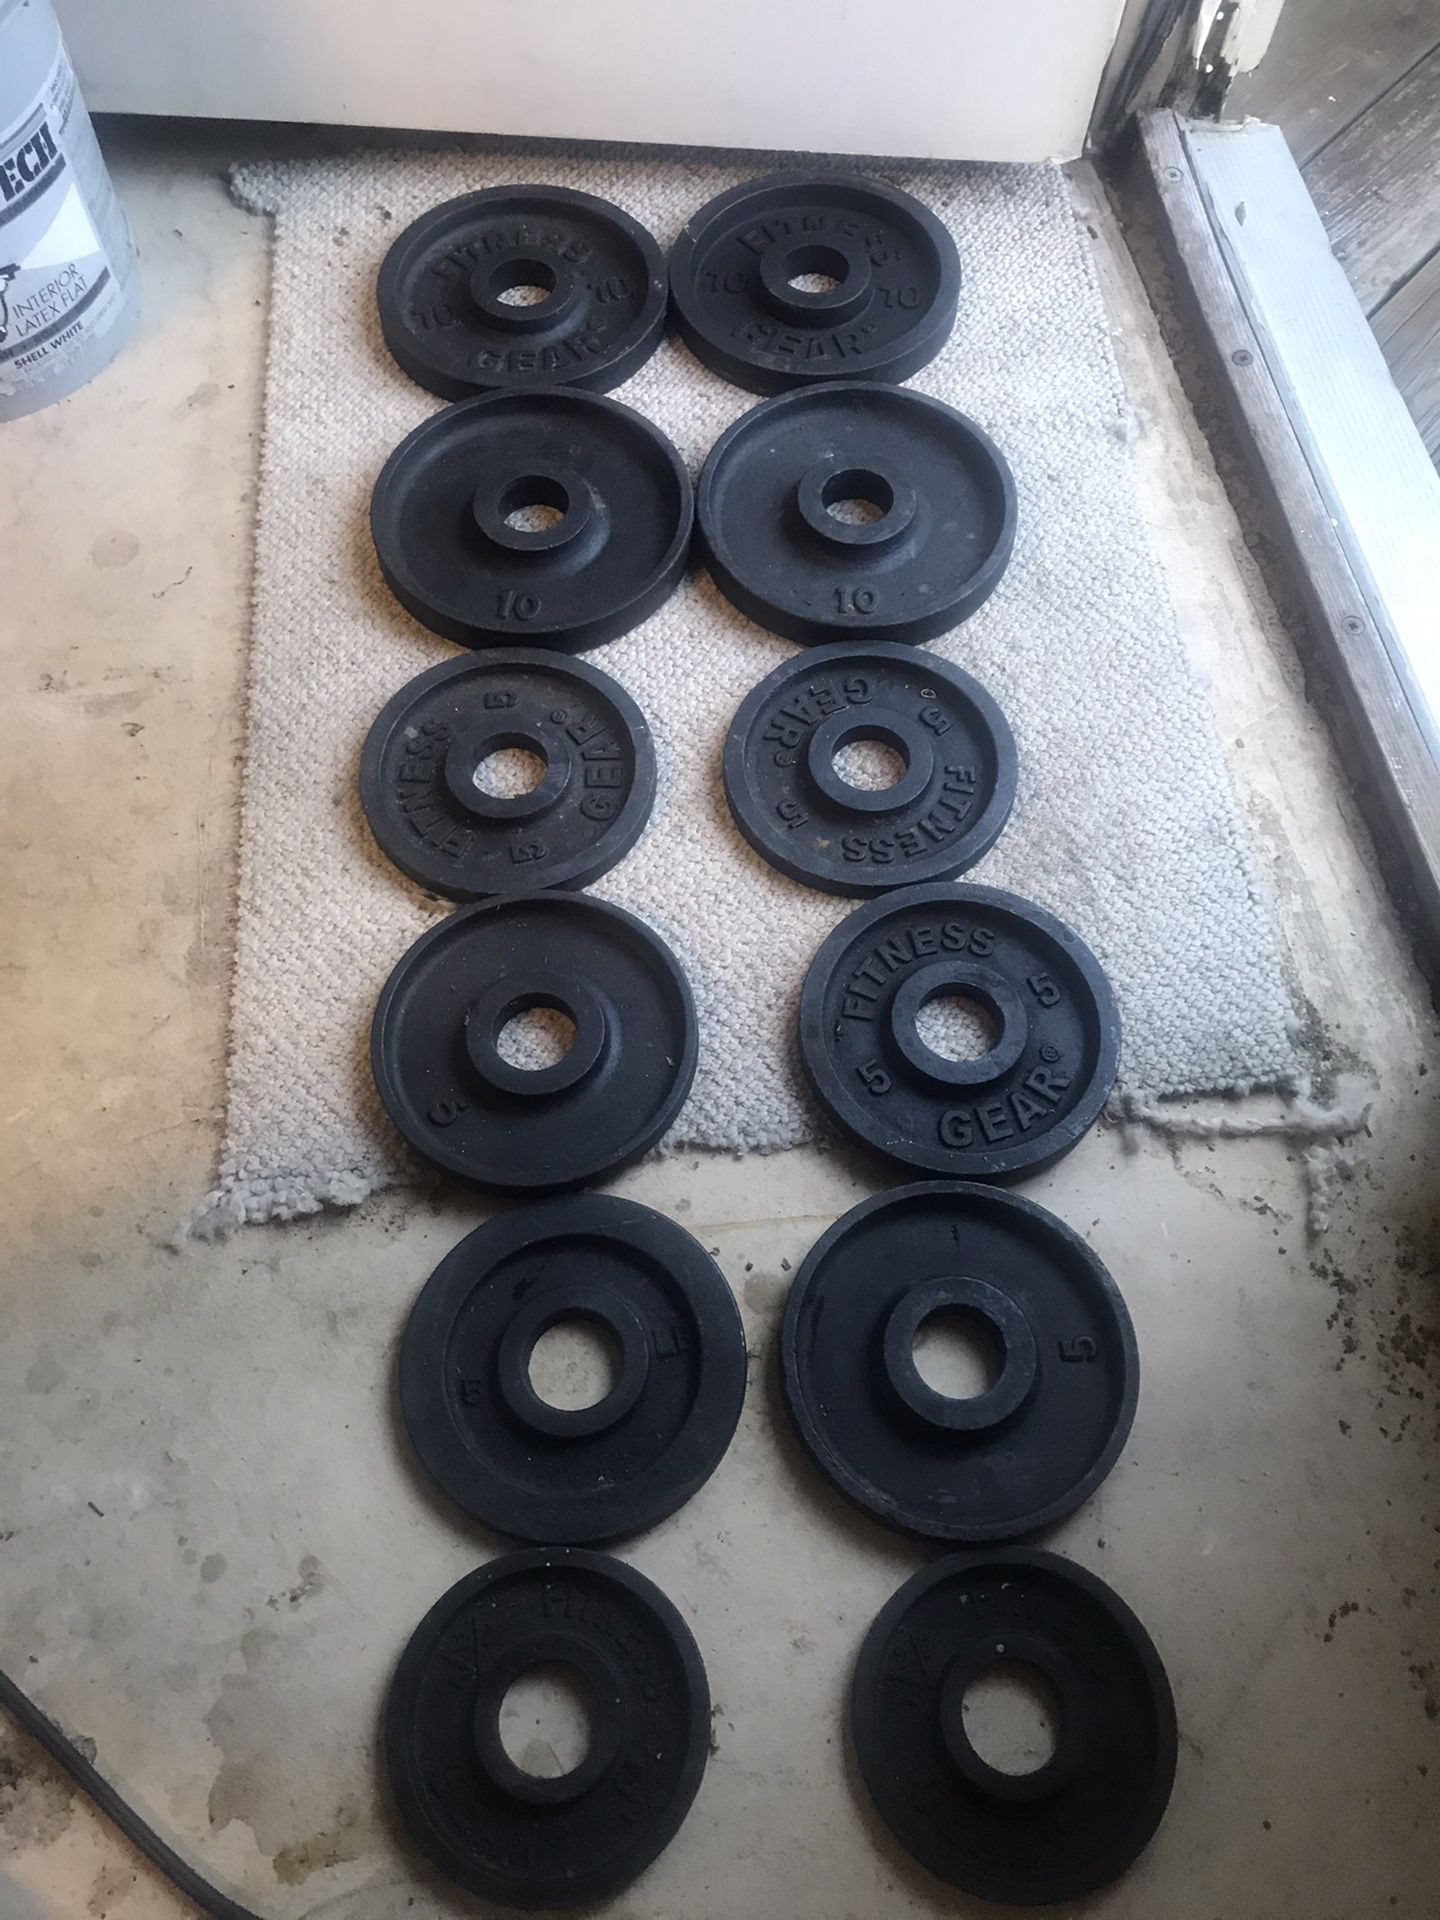 75 Lbs Olympic weights plates